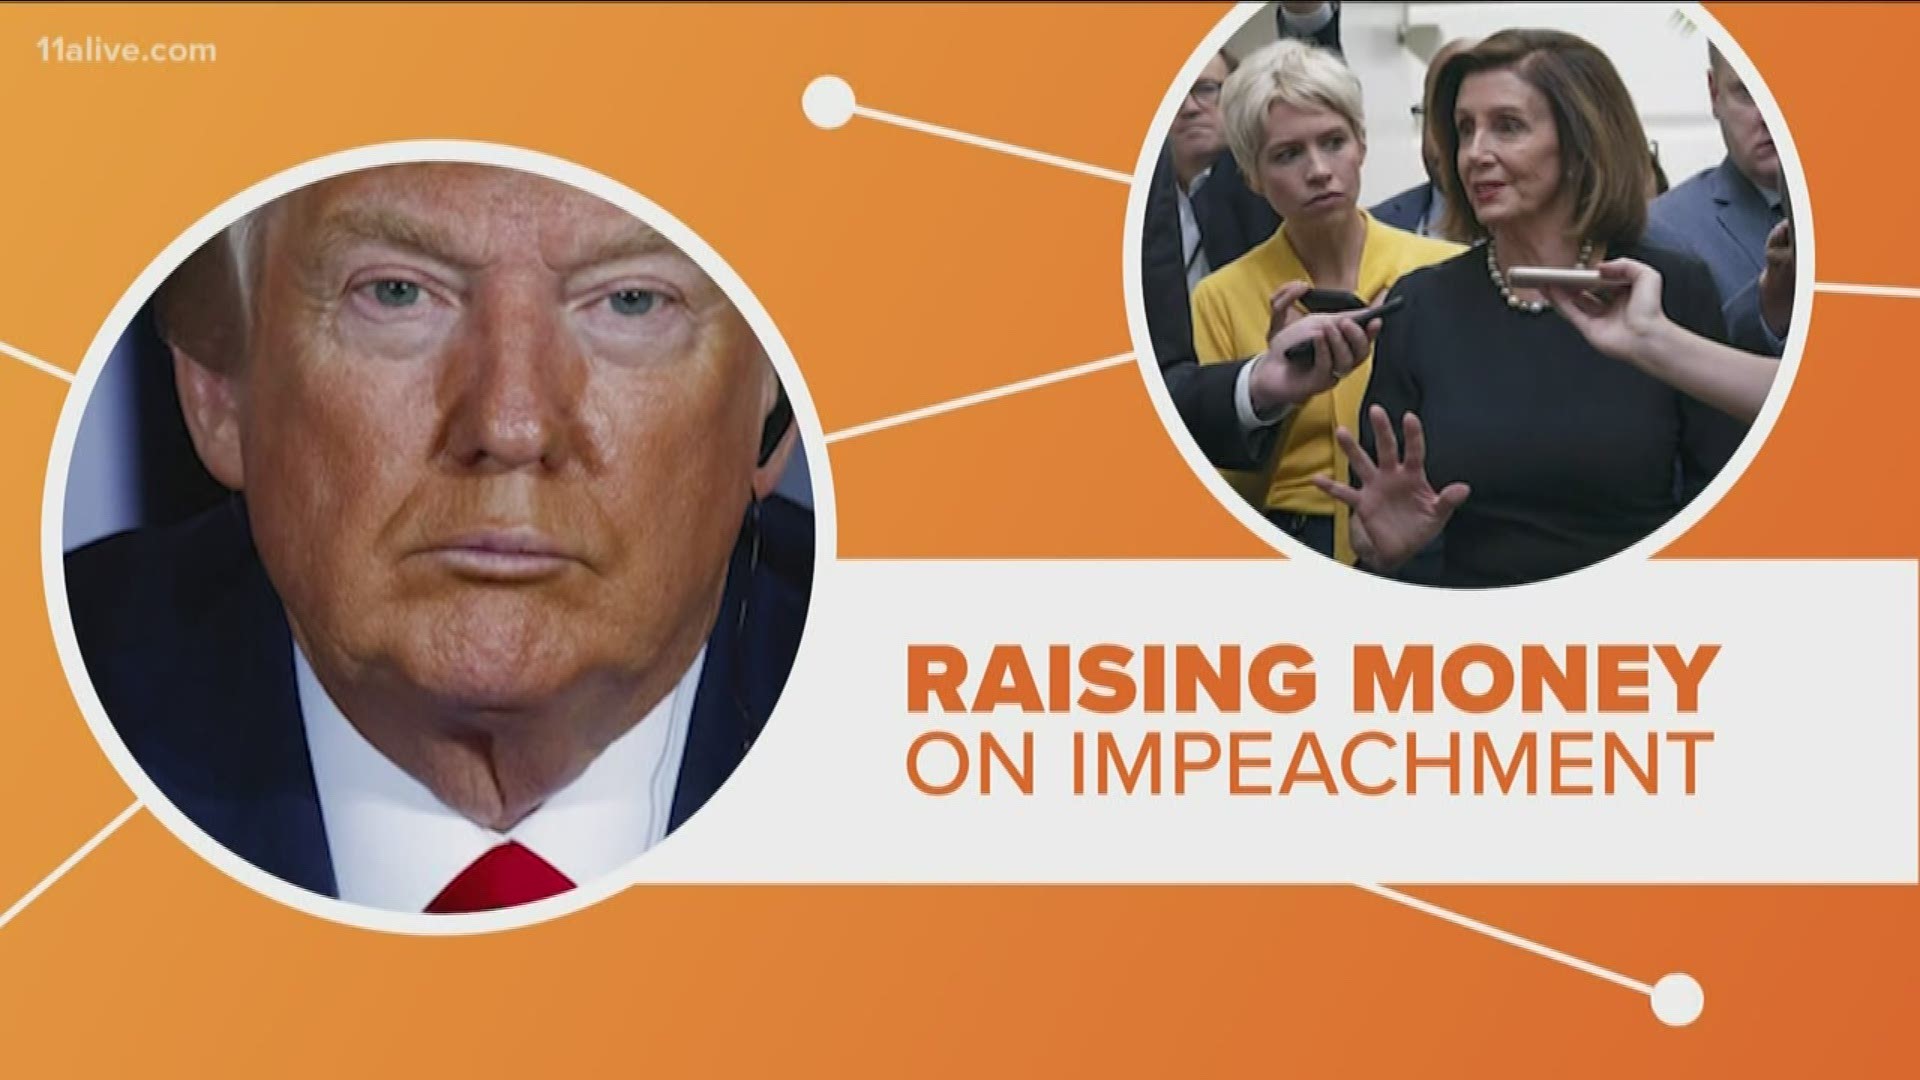 The impeachment inquiry announced by House Speaker Pelosi galvanized the president's supporters.